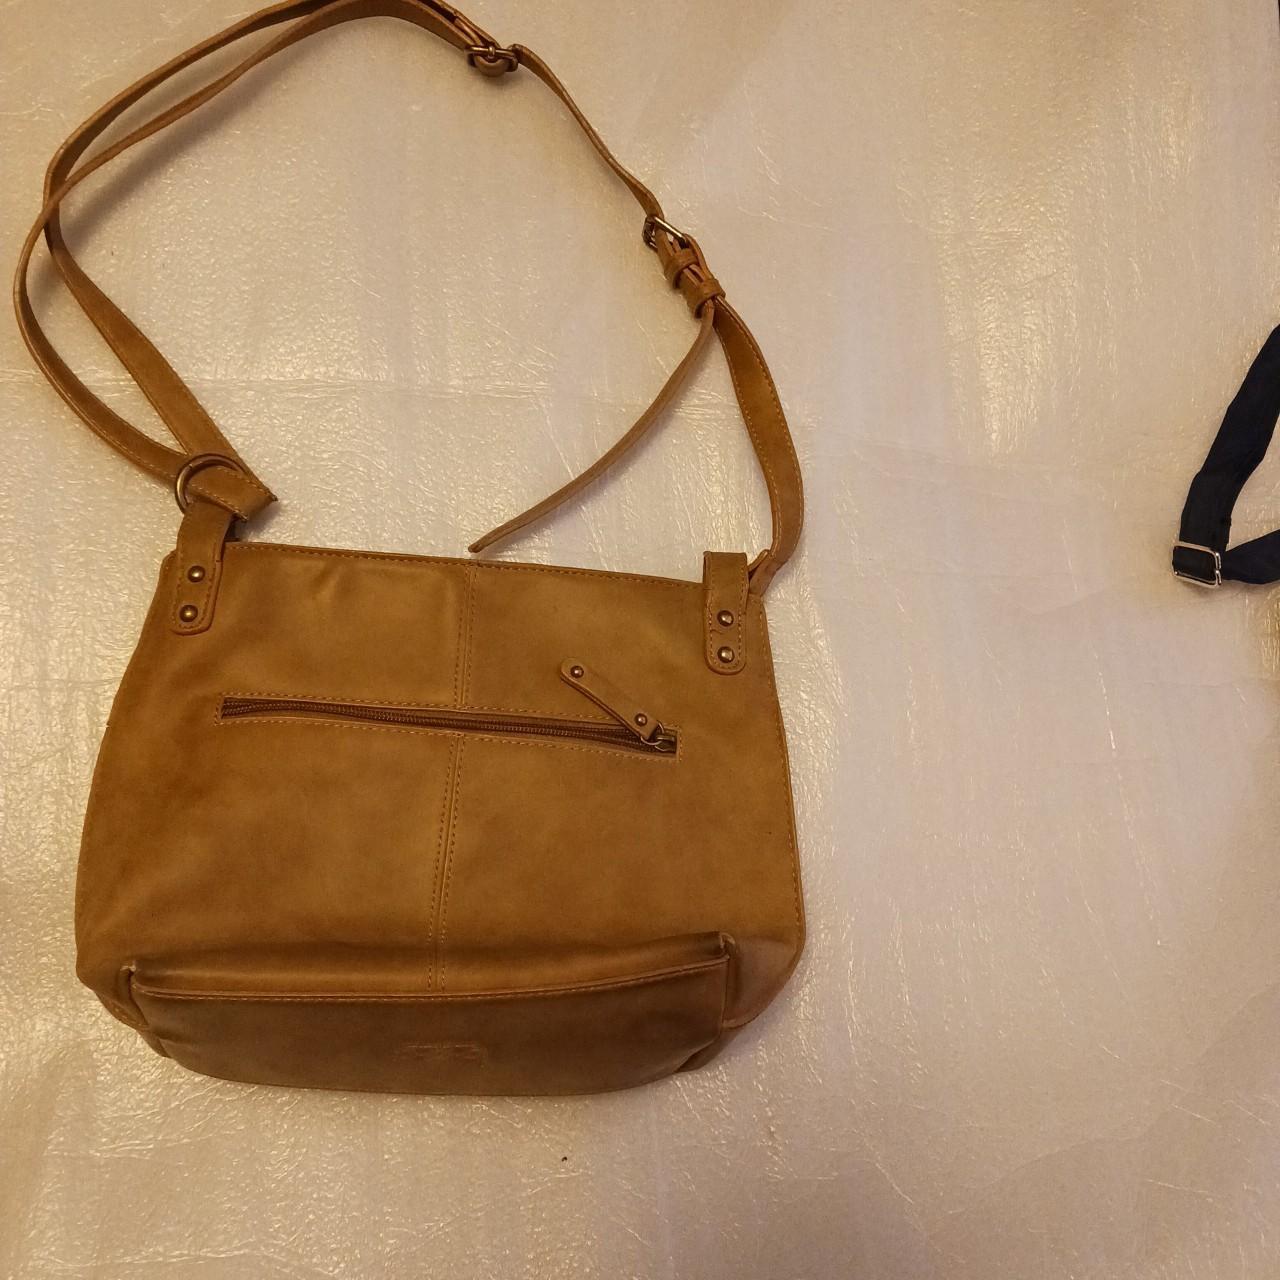 Product Image 2 - Great leather bag goes with